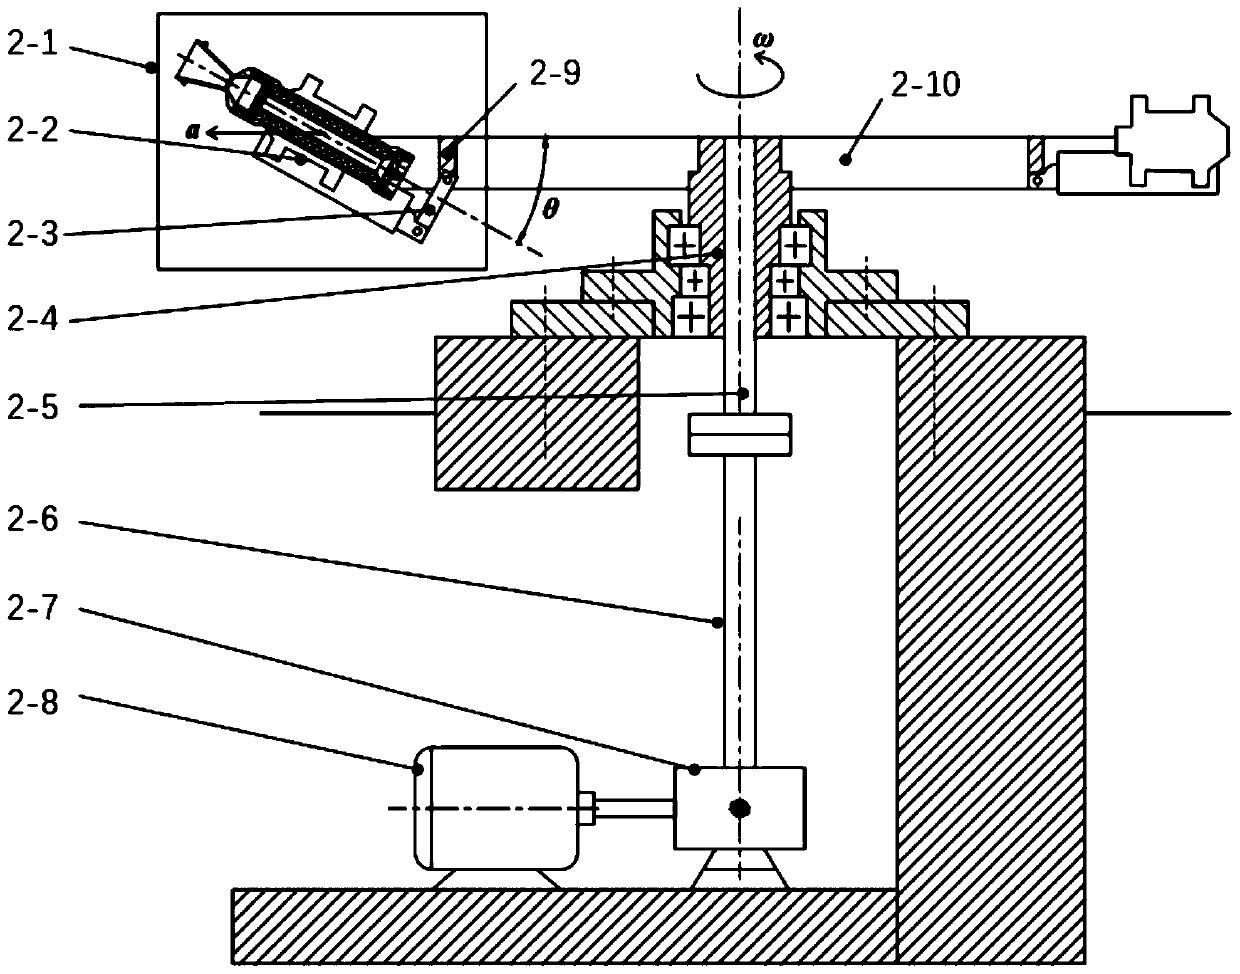 Test method for nonlinear unstable combustion of solid rocket motors under overload conditions